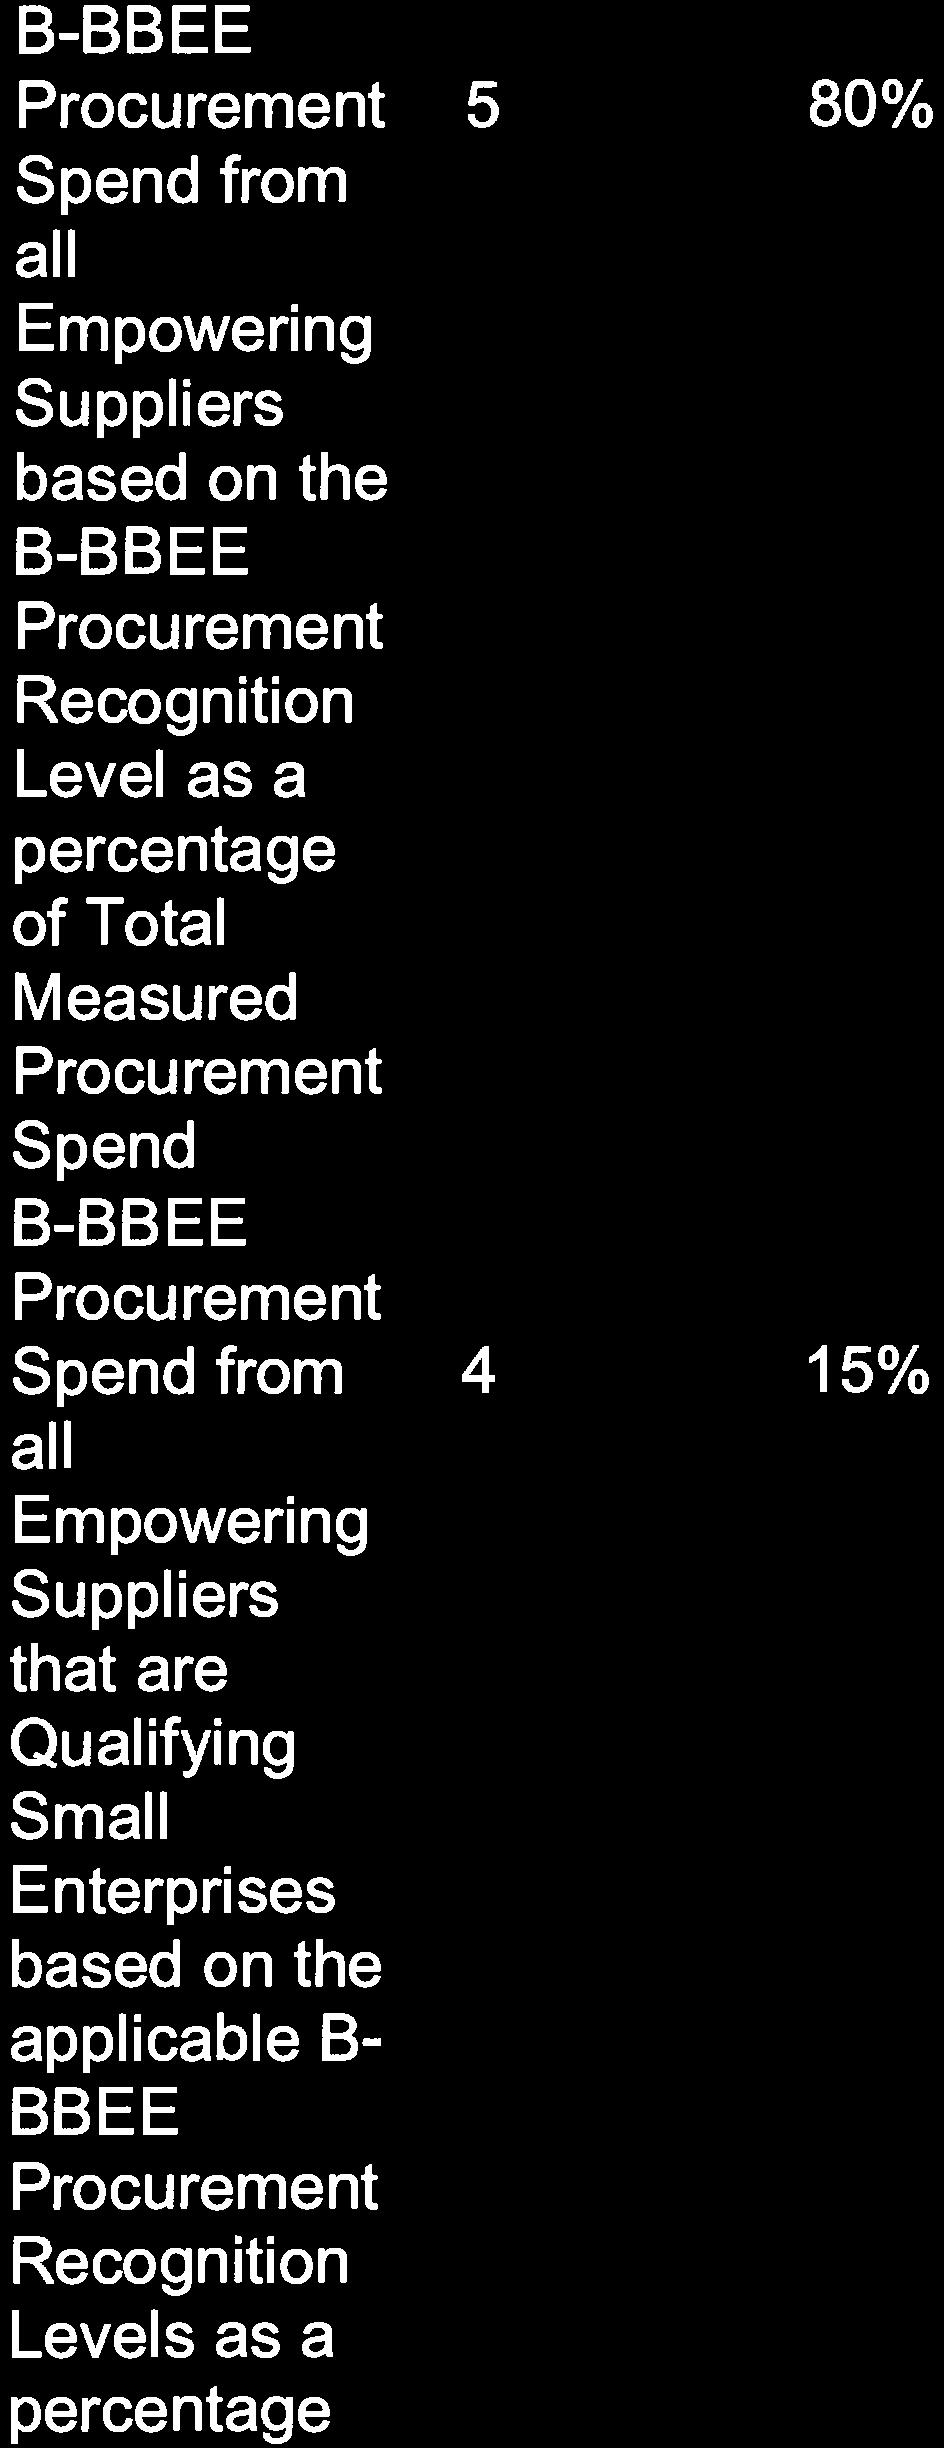 targets points Yearl B -BBEE Procurement 5 Spend from all Empowering